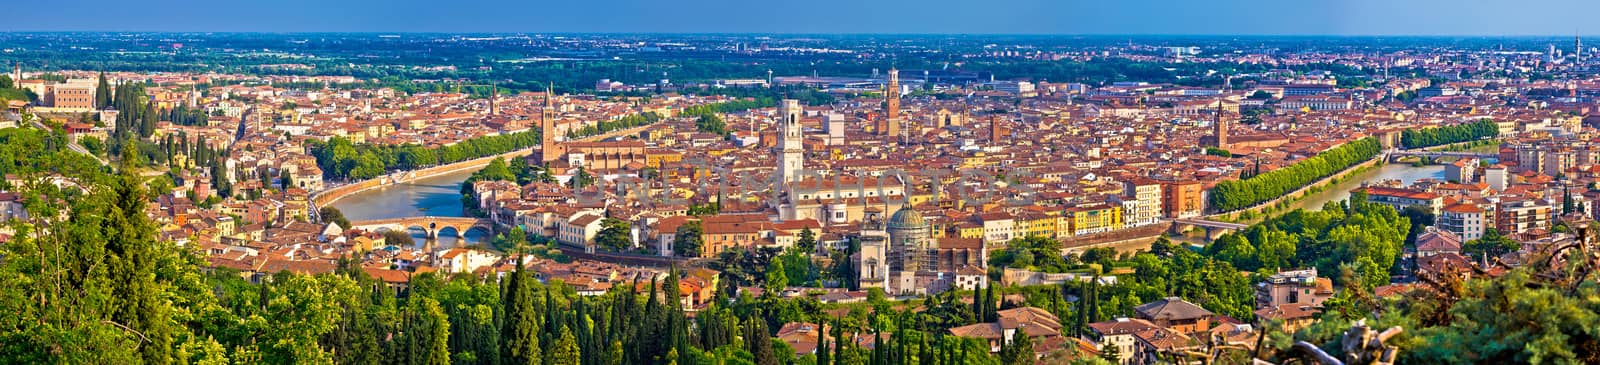 City of Verona old center and Adige river aerial panoramic view by xbrchx